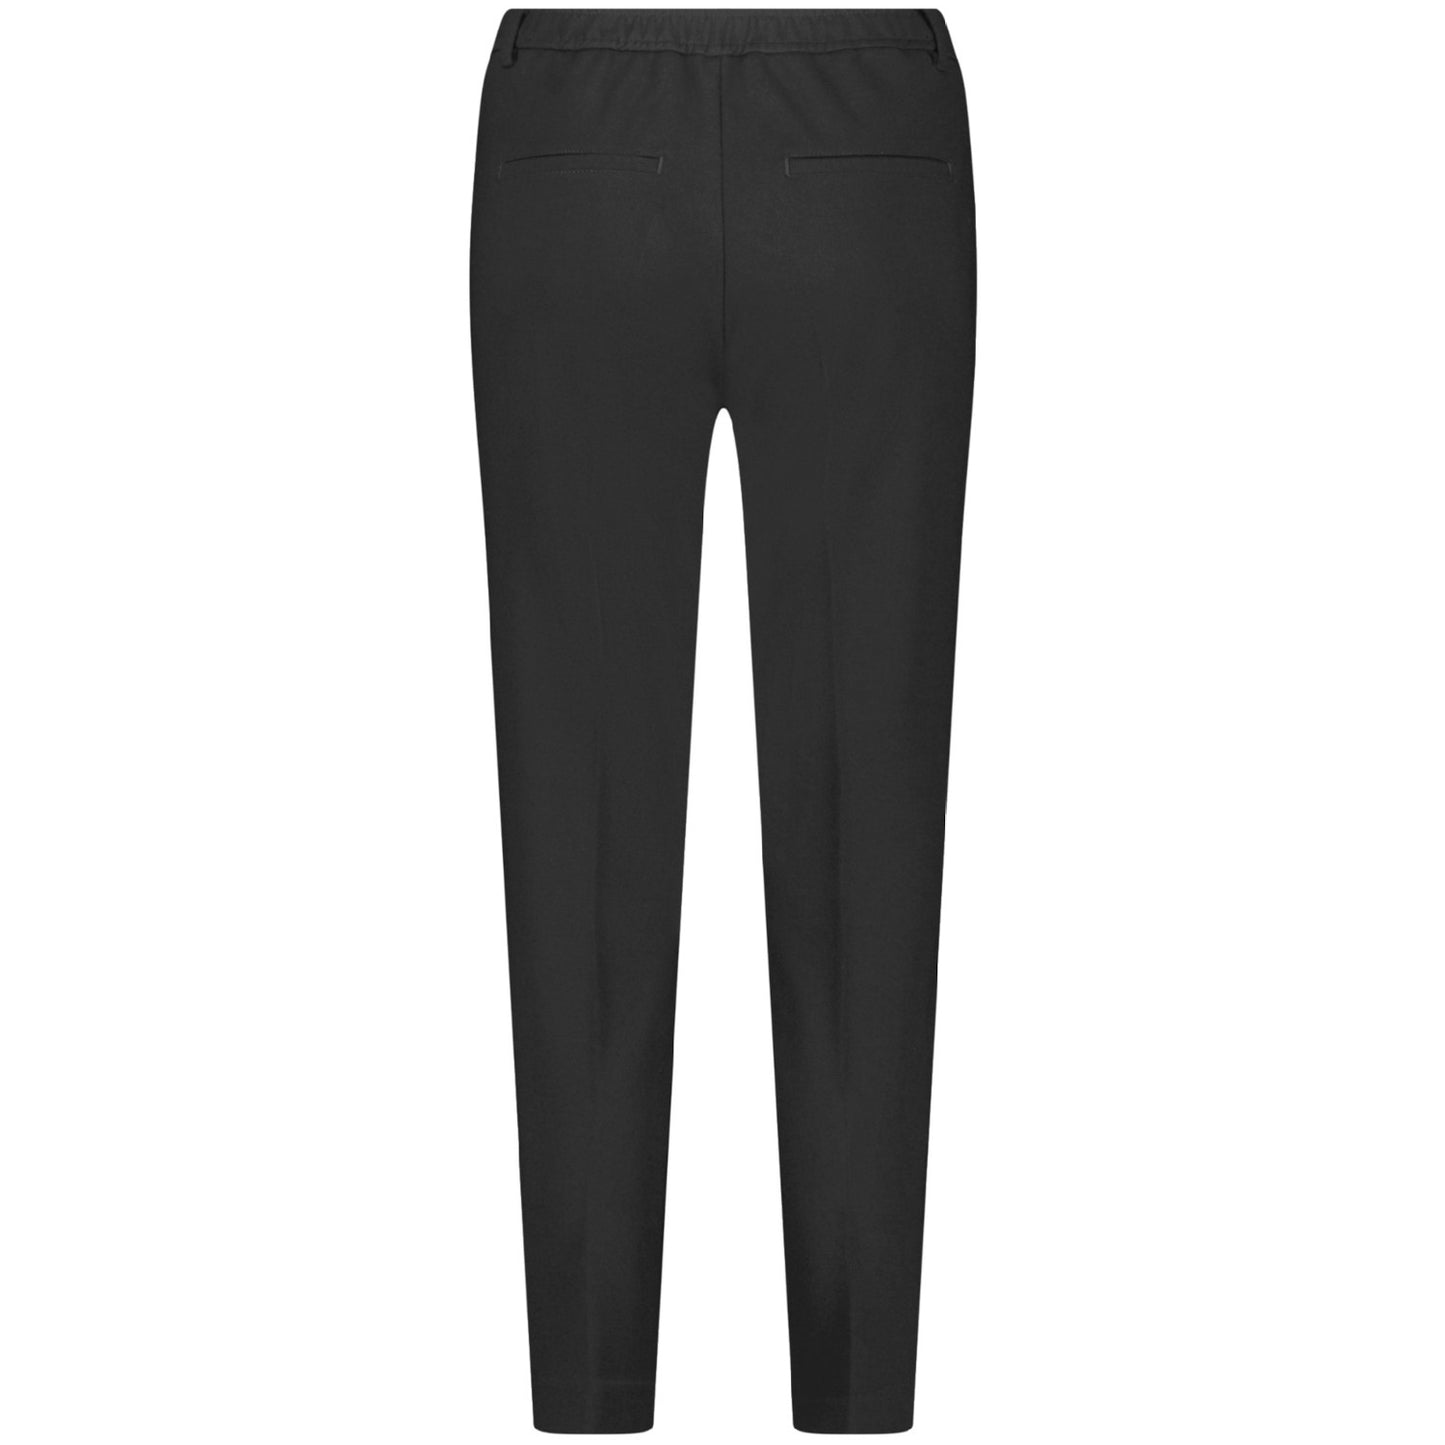 Gerry Weber 722036 66311 11000 Black Cropped Leisure Trousers